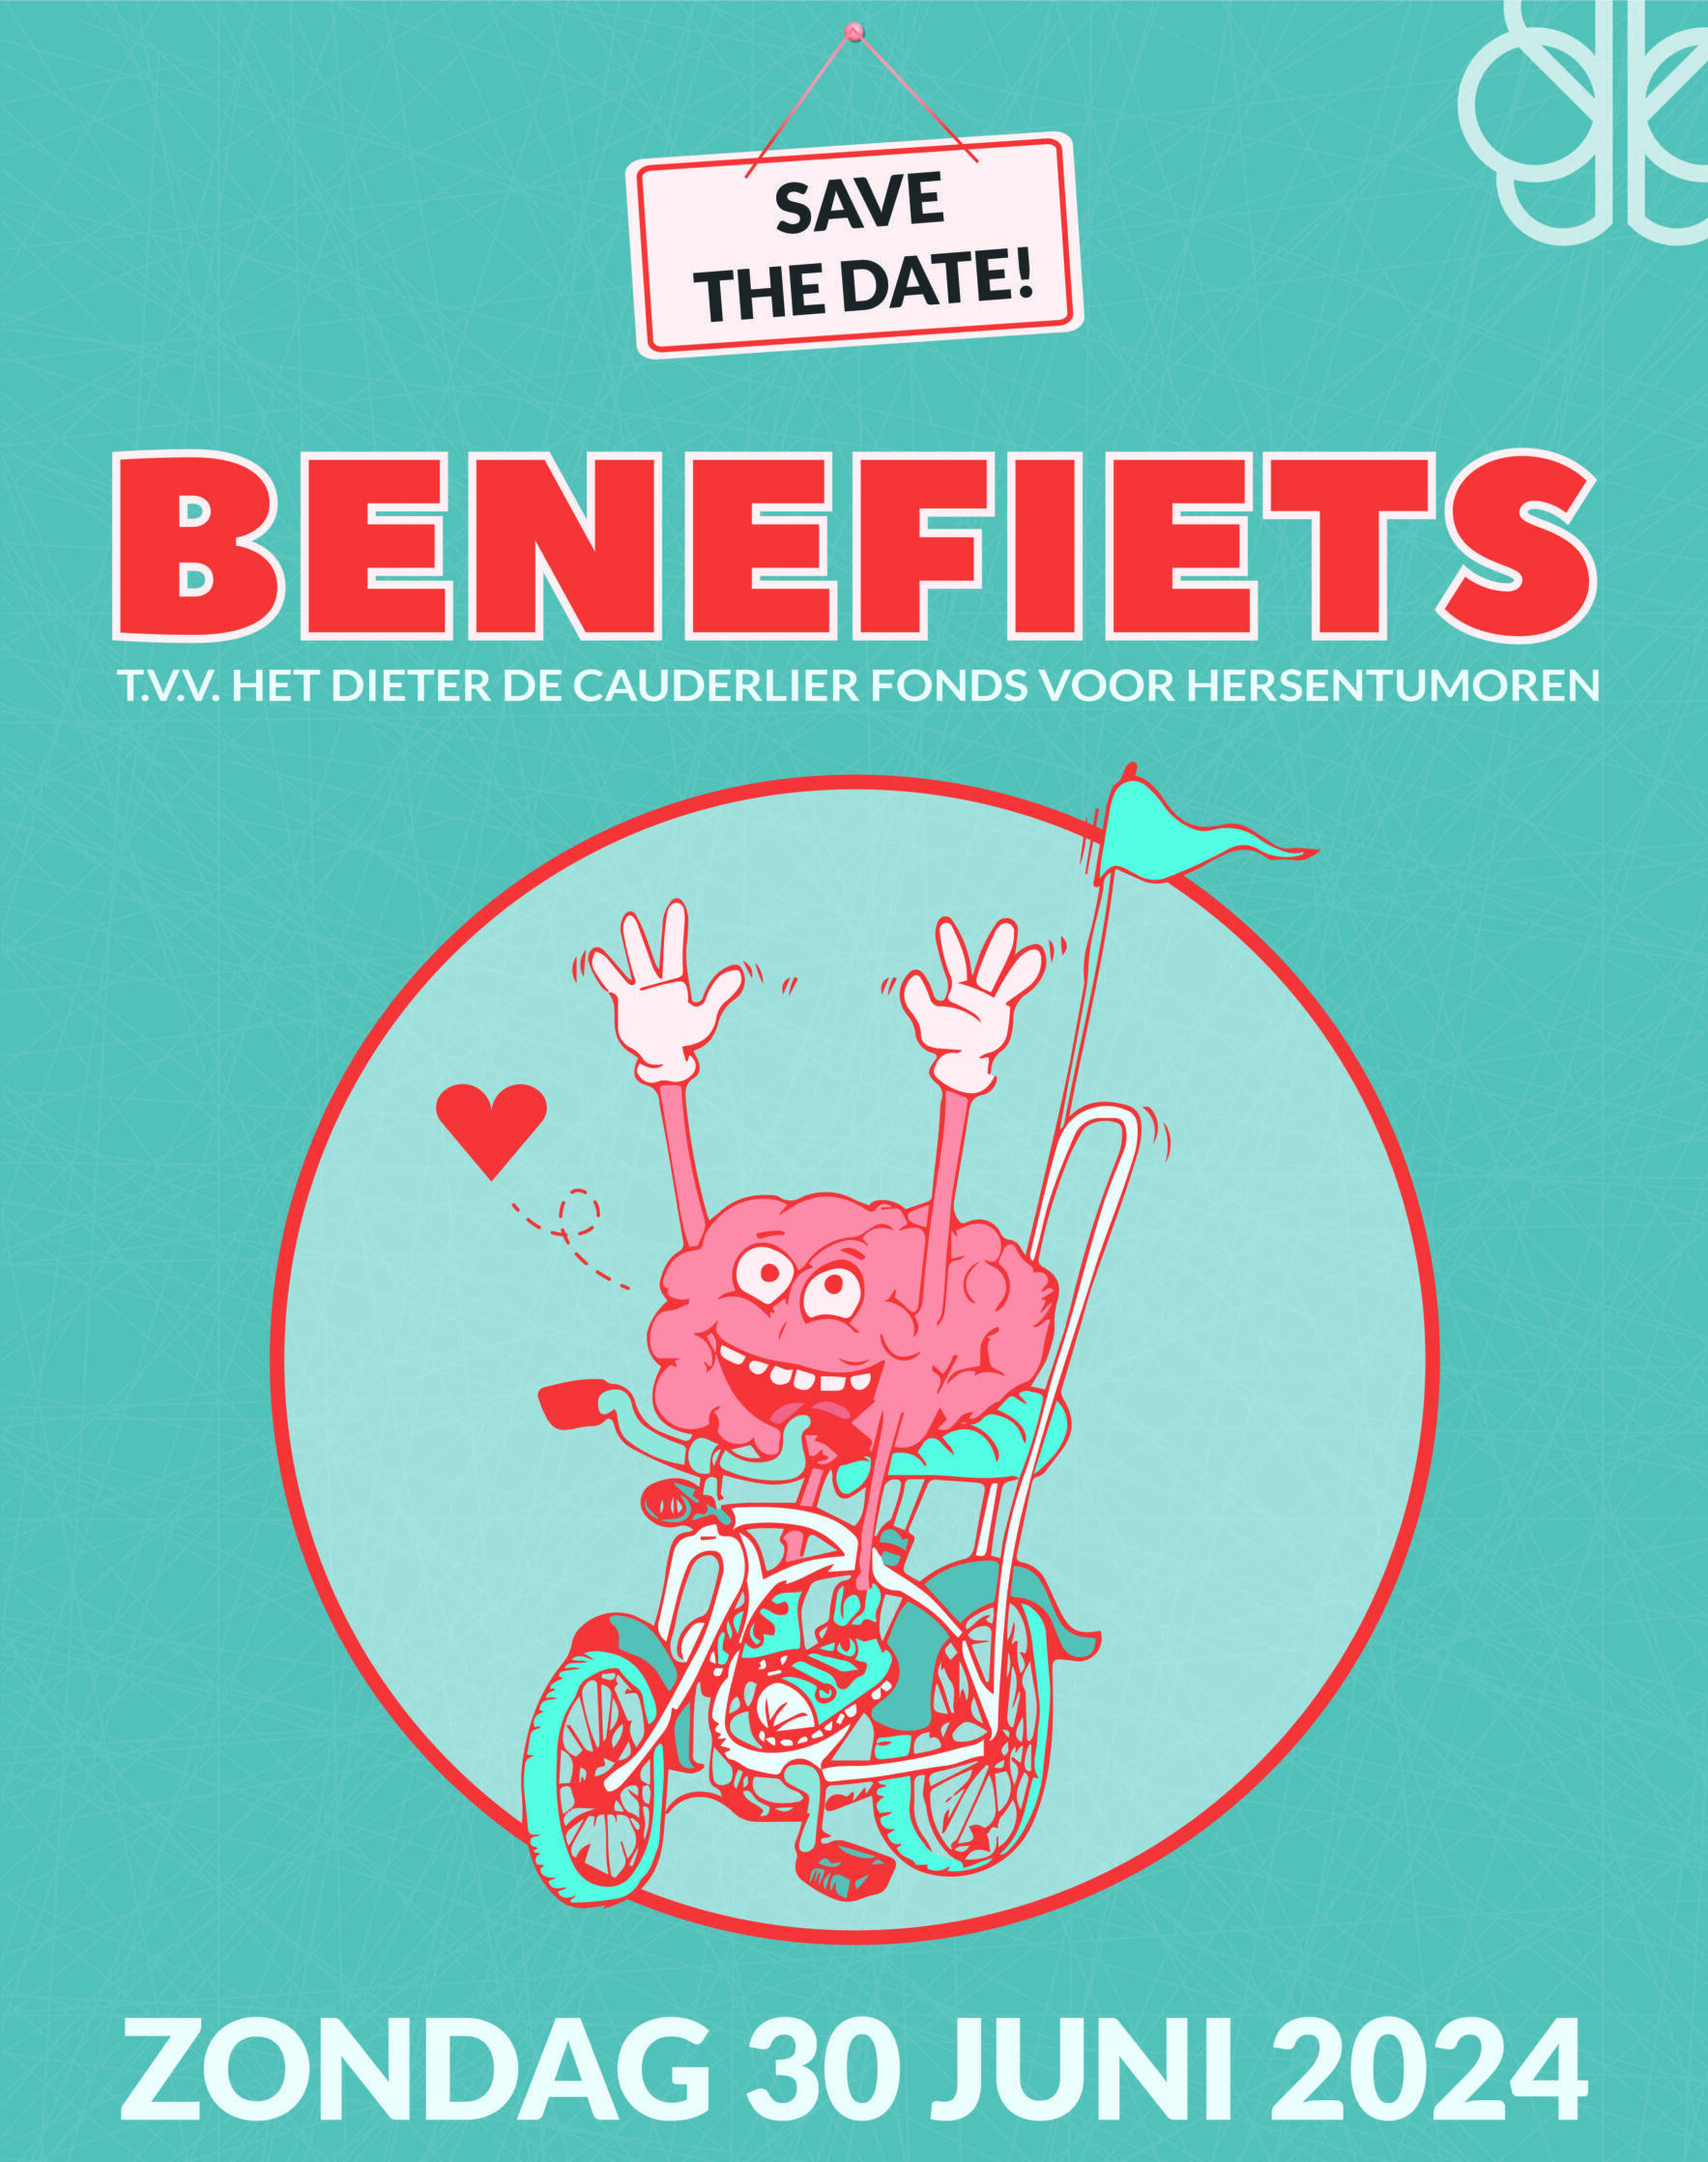 Save the date BeneFIETS